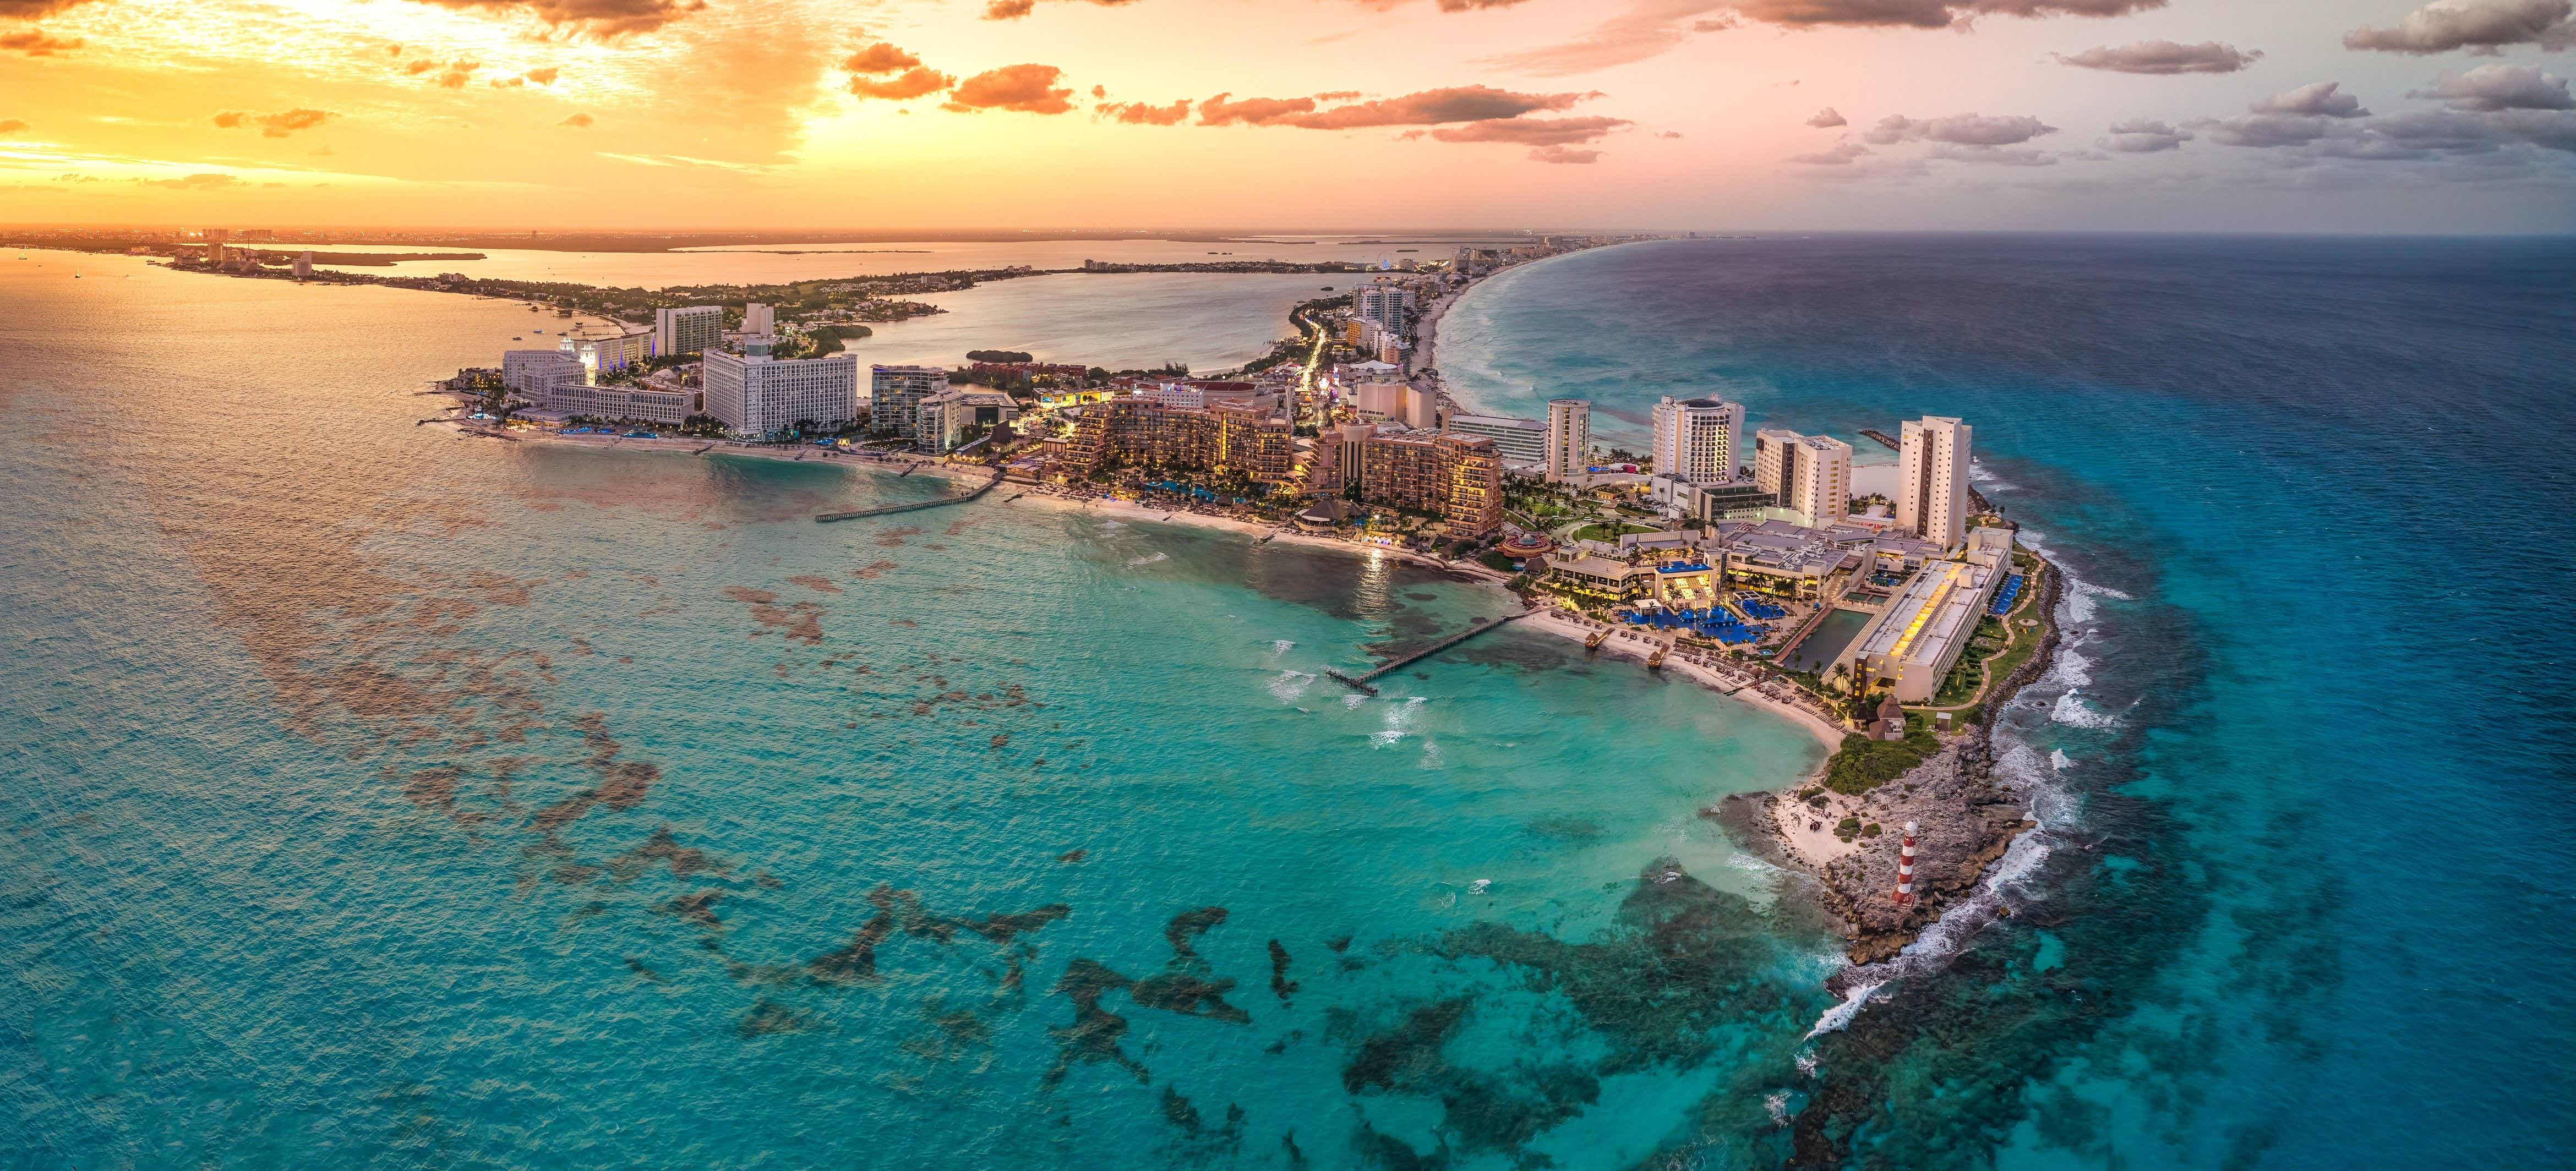 Cancun holidays 2023 from £568 | loveholidays